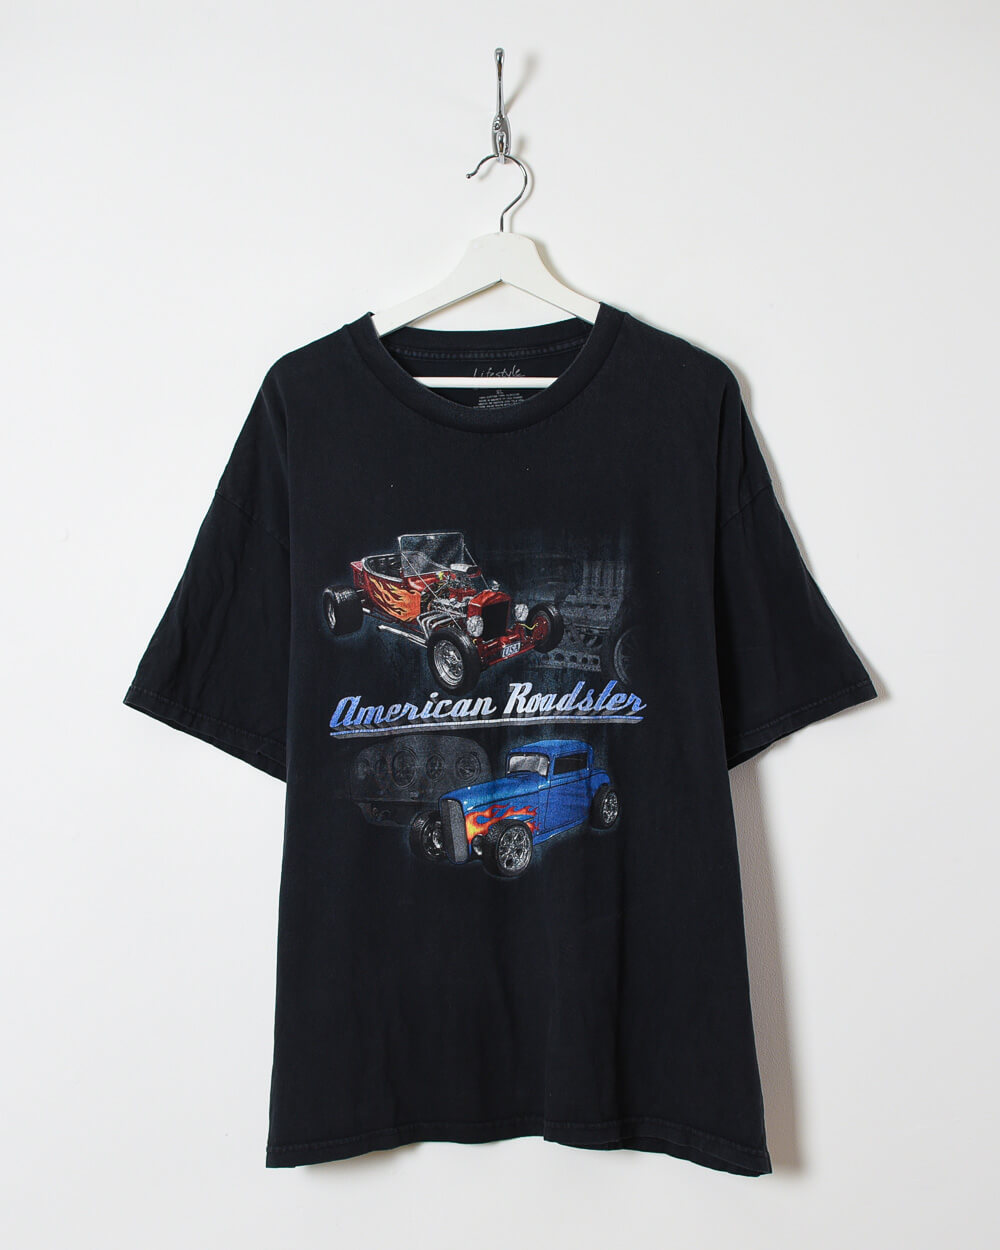 American Roadster T-Shirt - X-Large - Domno Vintage 90s, 80s, 00s Retro and Vintage Clothing 